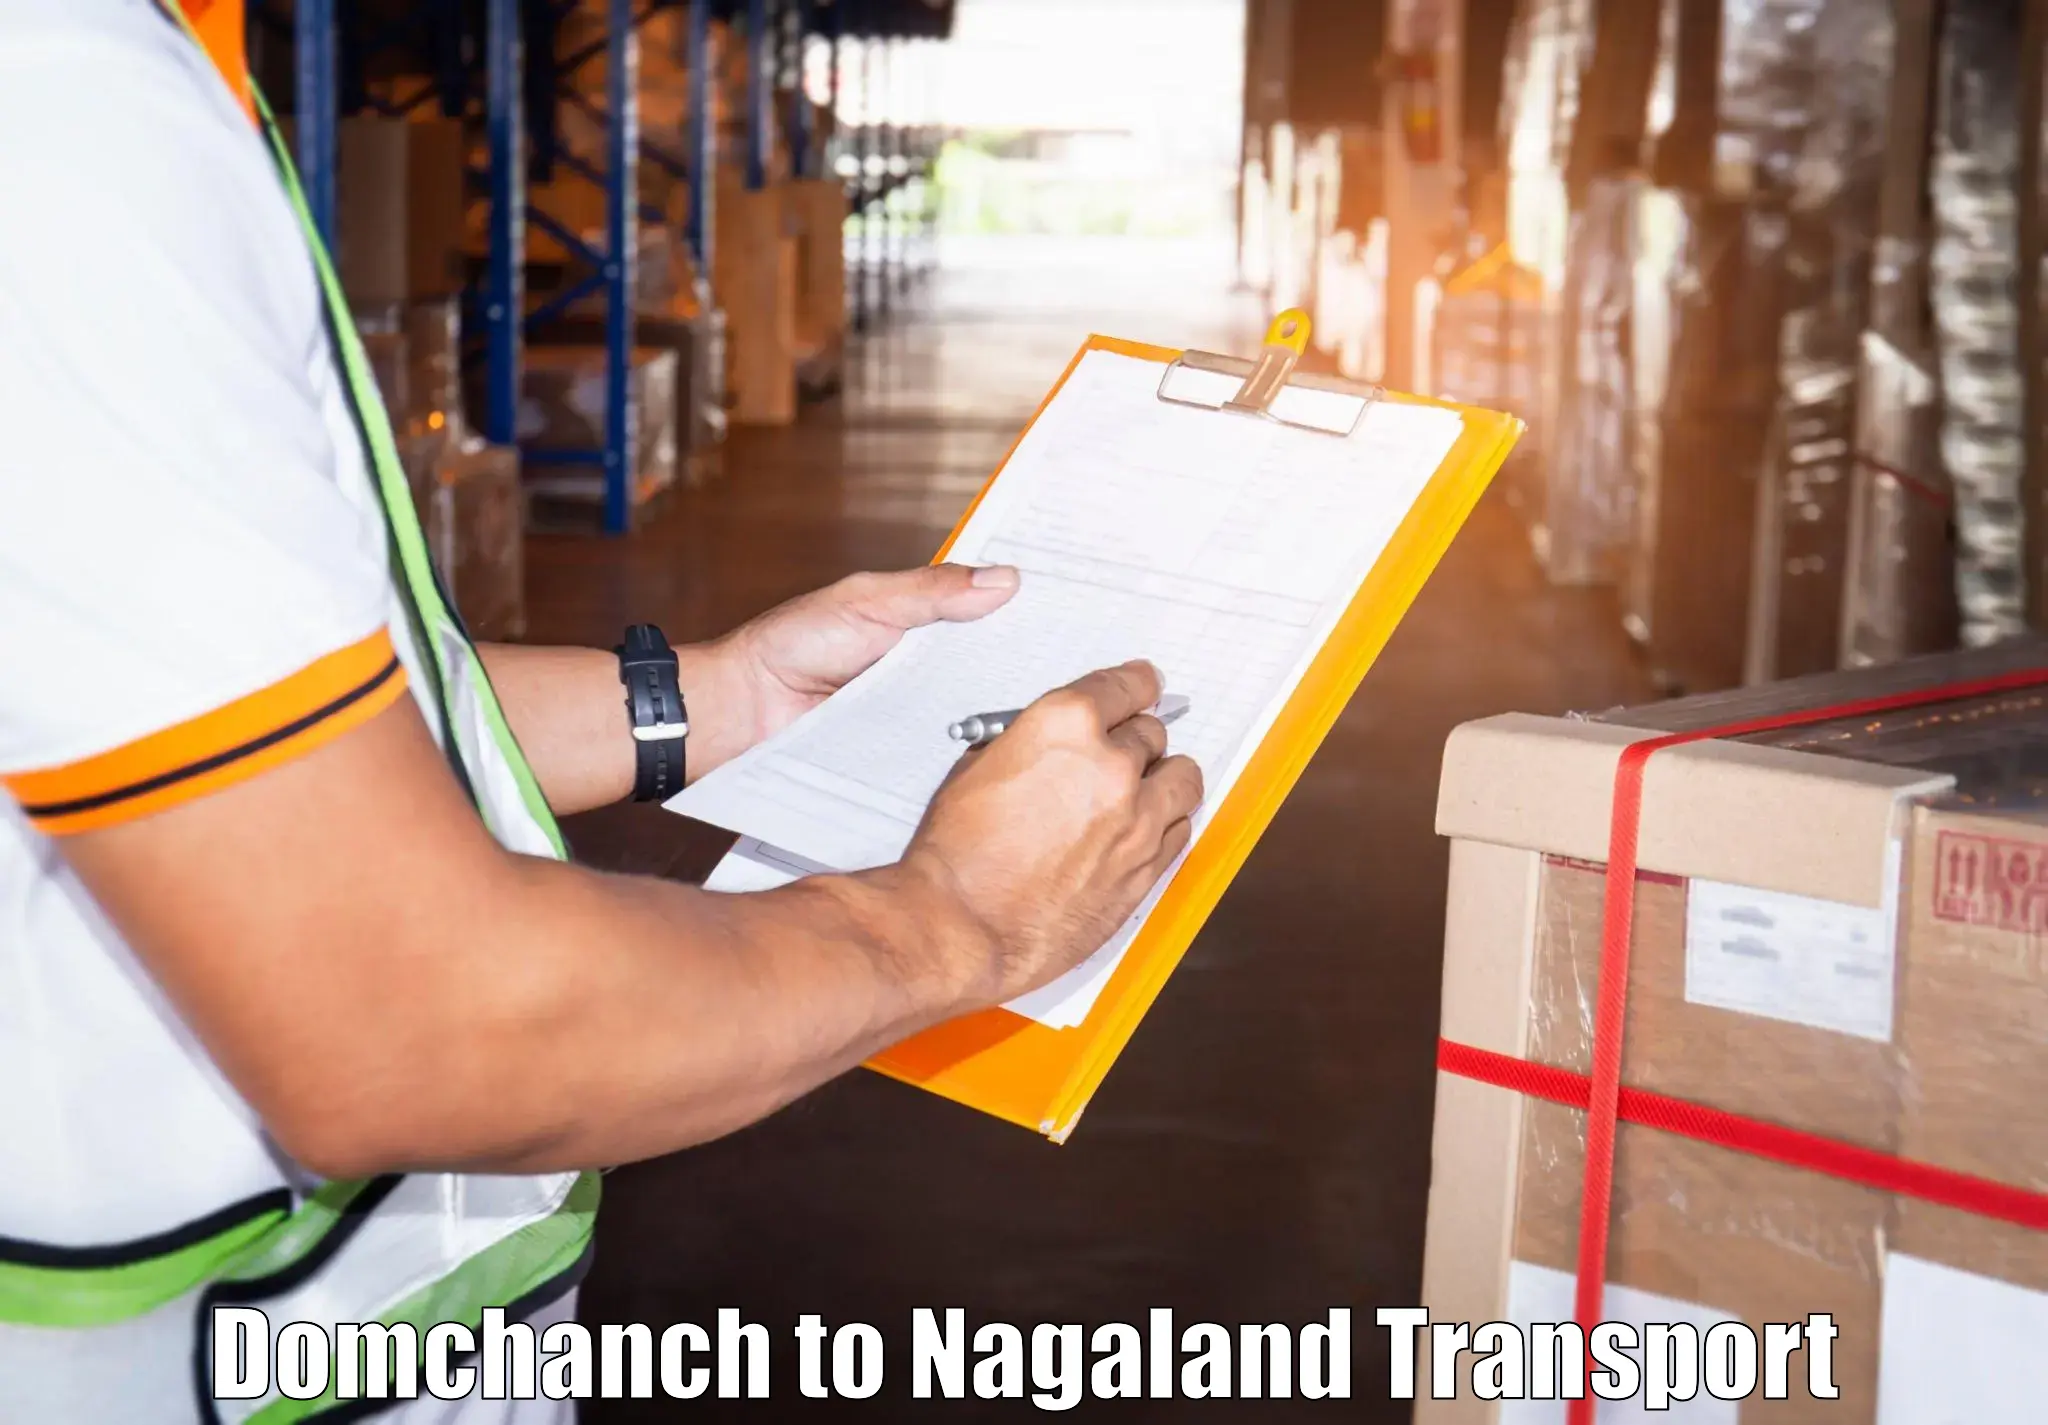 Truck transport companies in India Domchanch to Nagaland